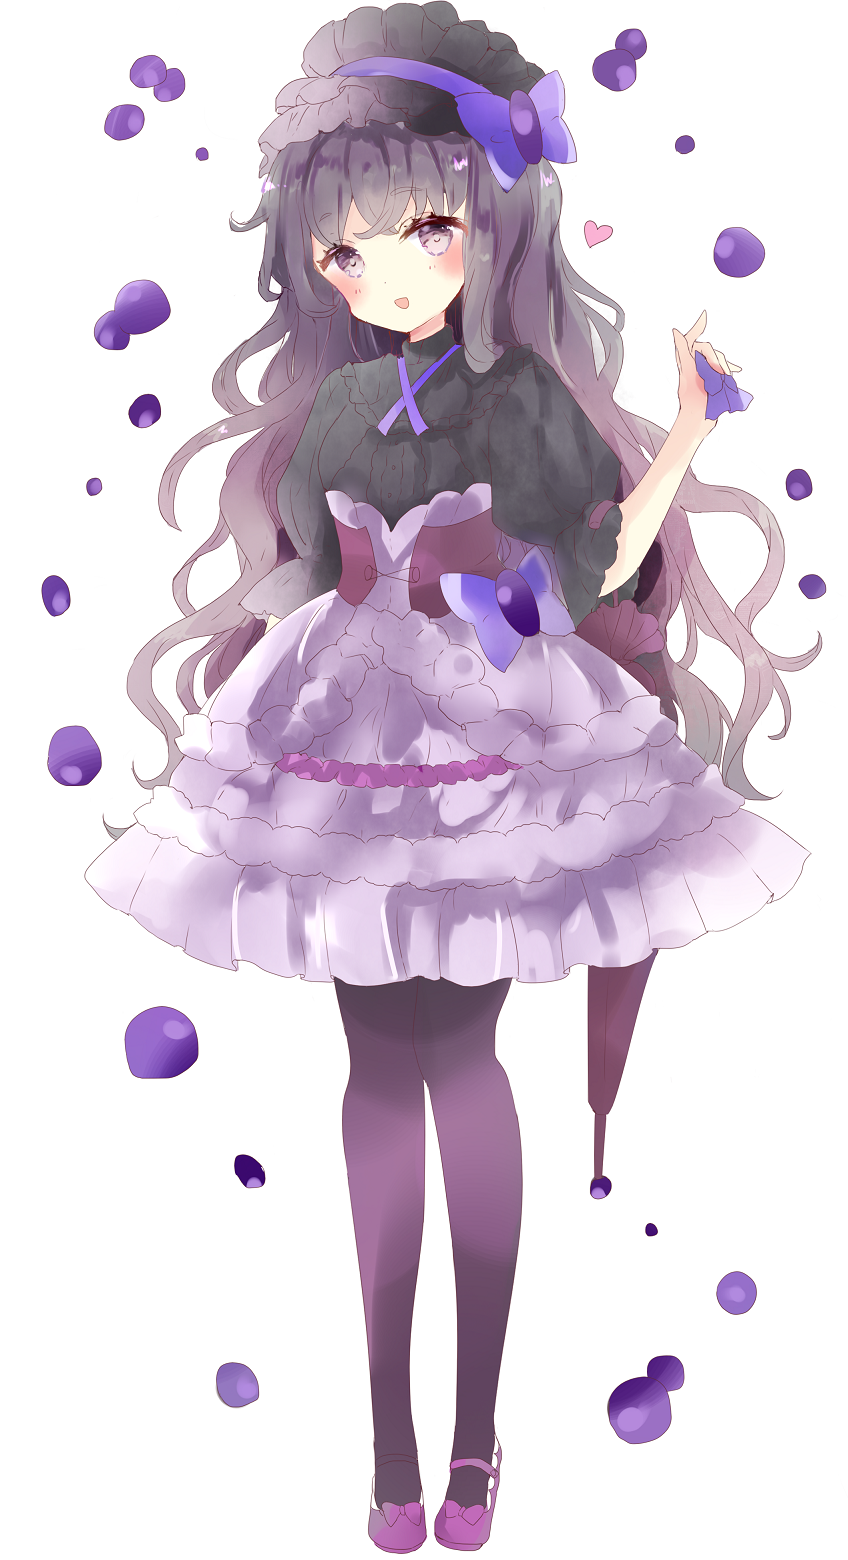 1girl :d bangs black_hair black_legwear black_shirt blush bow closed_umbrella commentary_request eyebrows_visible_through_hair frilled_skirt frills full_body hairband hand_up high-waist_skirt highres holding long_hair looking_at_viewer open_mouth original pantyhose puffy_short_sleeves puffy_sleeves purple_bow purple_footwear purple_hairband purple_skirt purple_umbrella shirt shoes short_sleeves simple_background skirt smile solo standing tsukiyo_(skymint) umbrella very_long_hair violet_eyes white_background